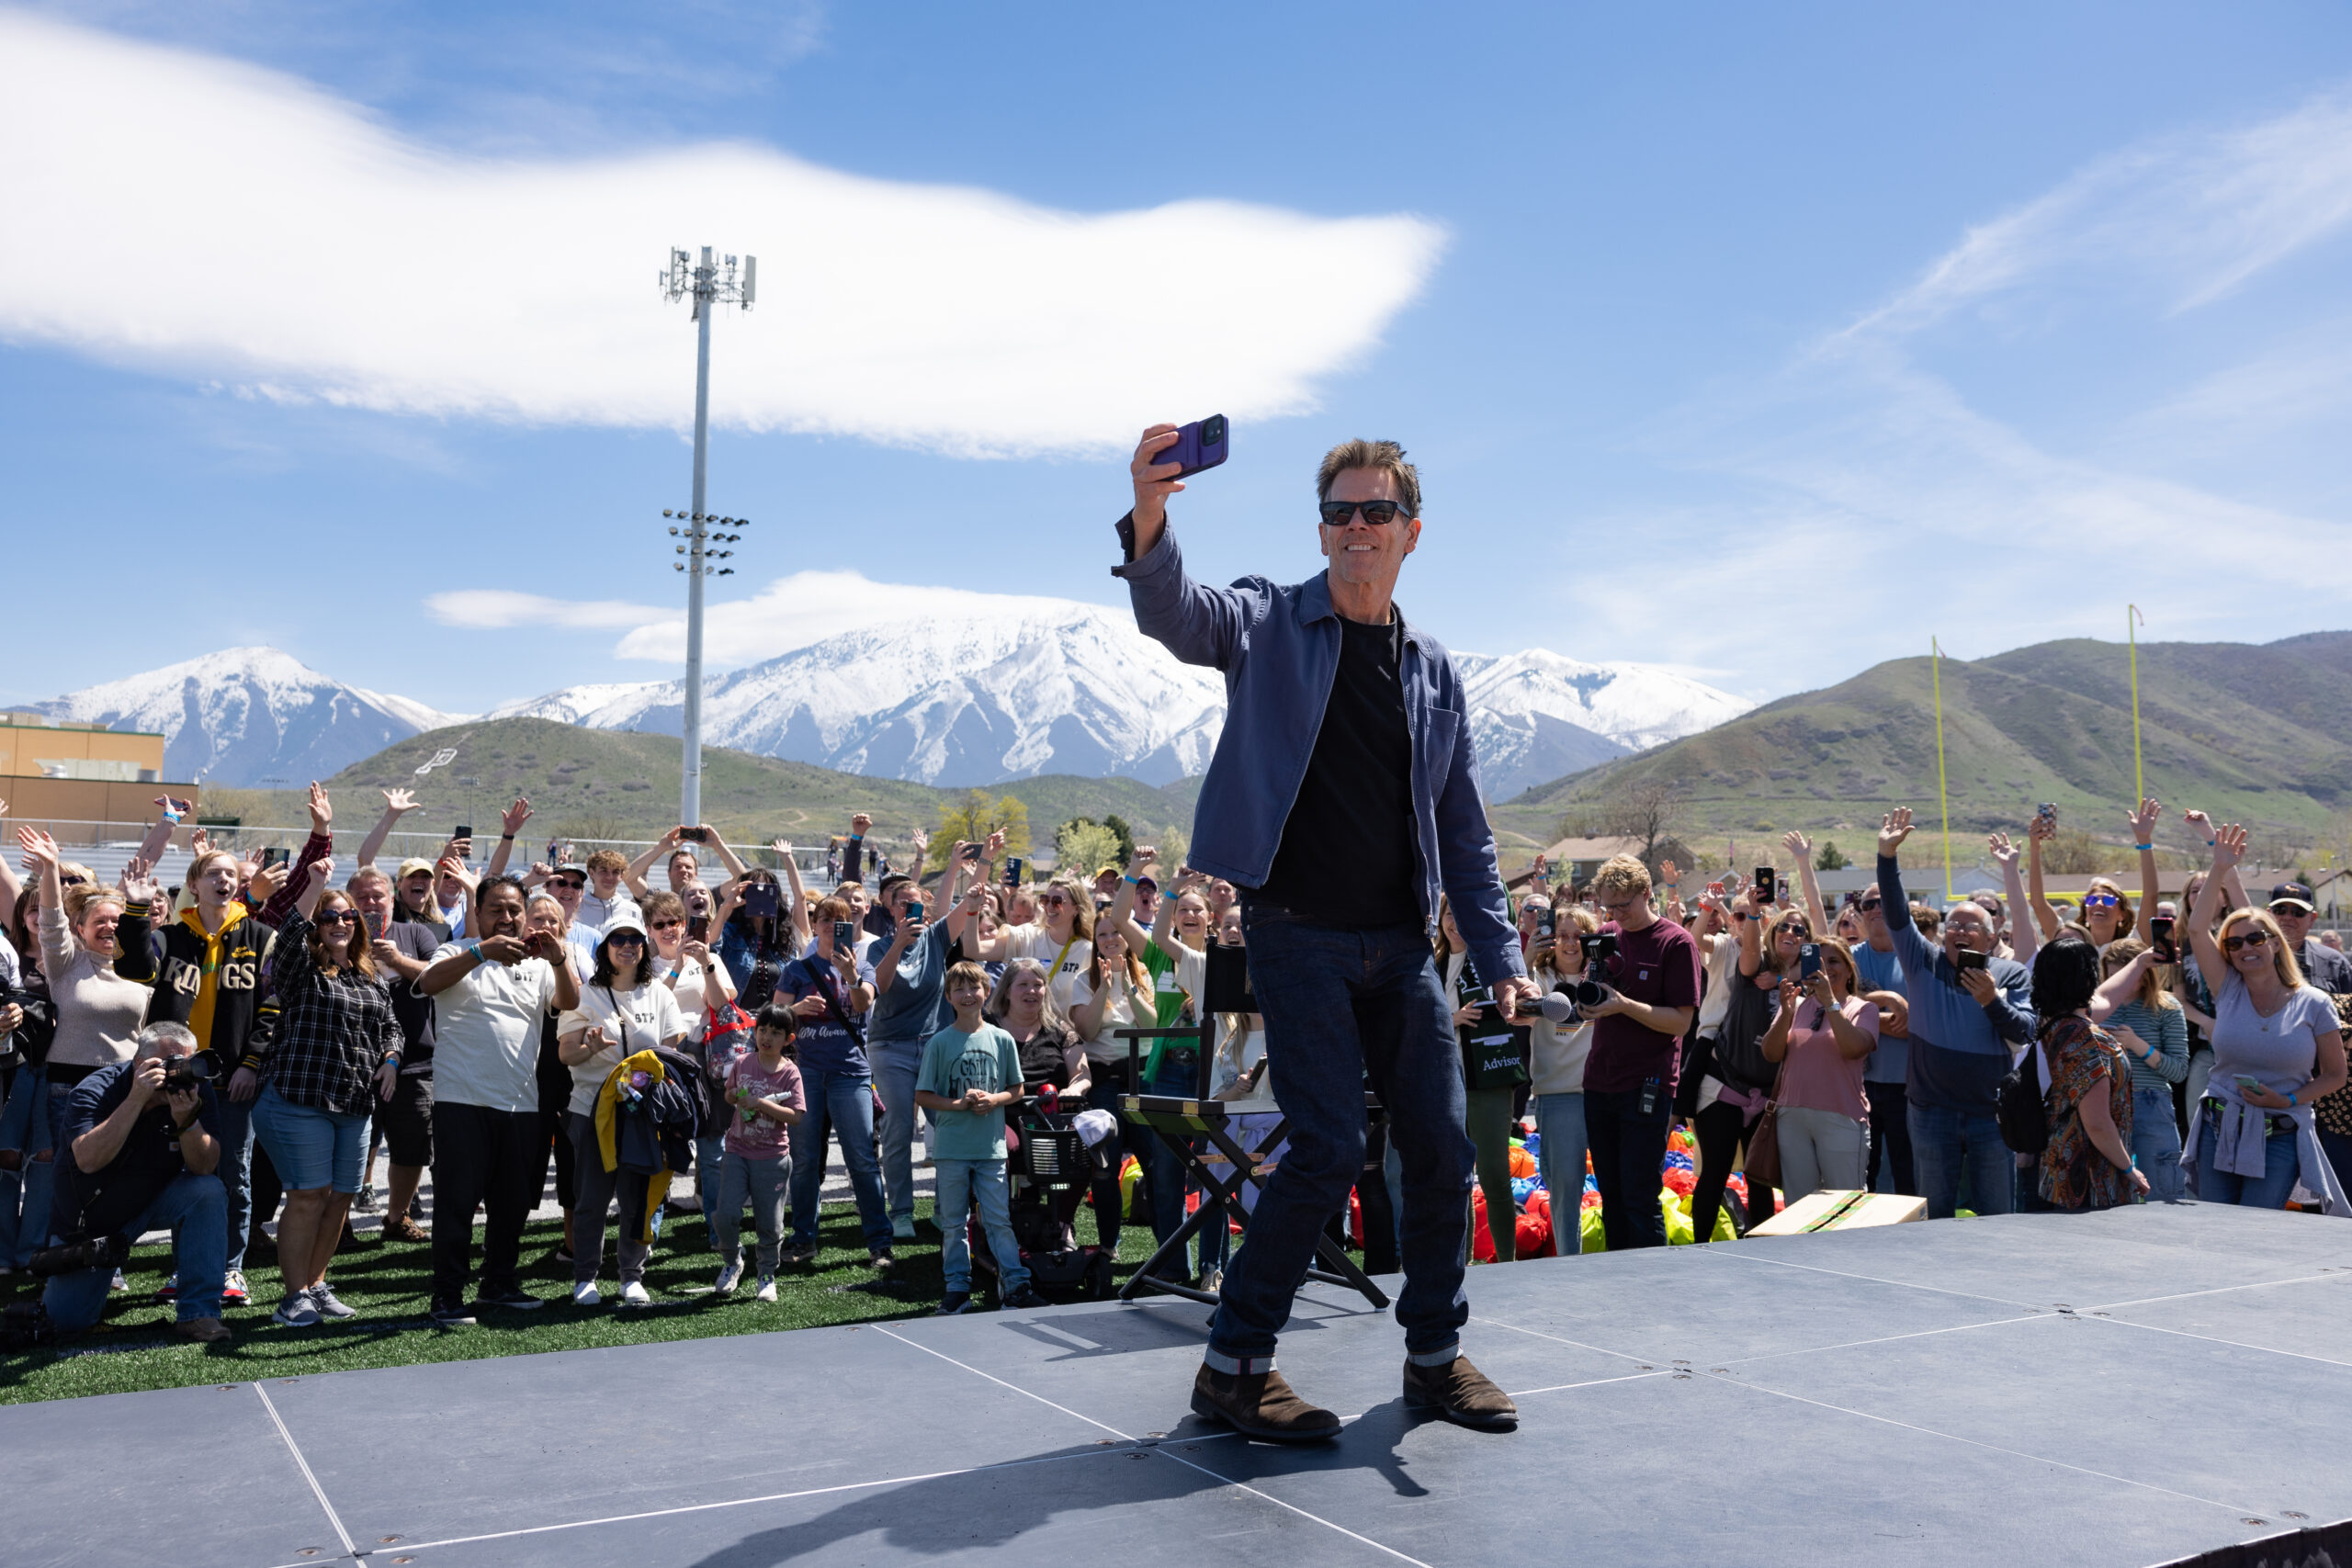 Kevin Bacon visits Payson High school in honor of the 40th Anniversary of Footloose at Payson High School on April 20, 2024 Payson, Utah.